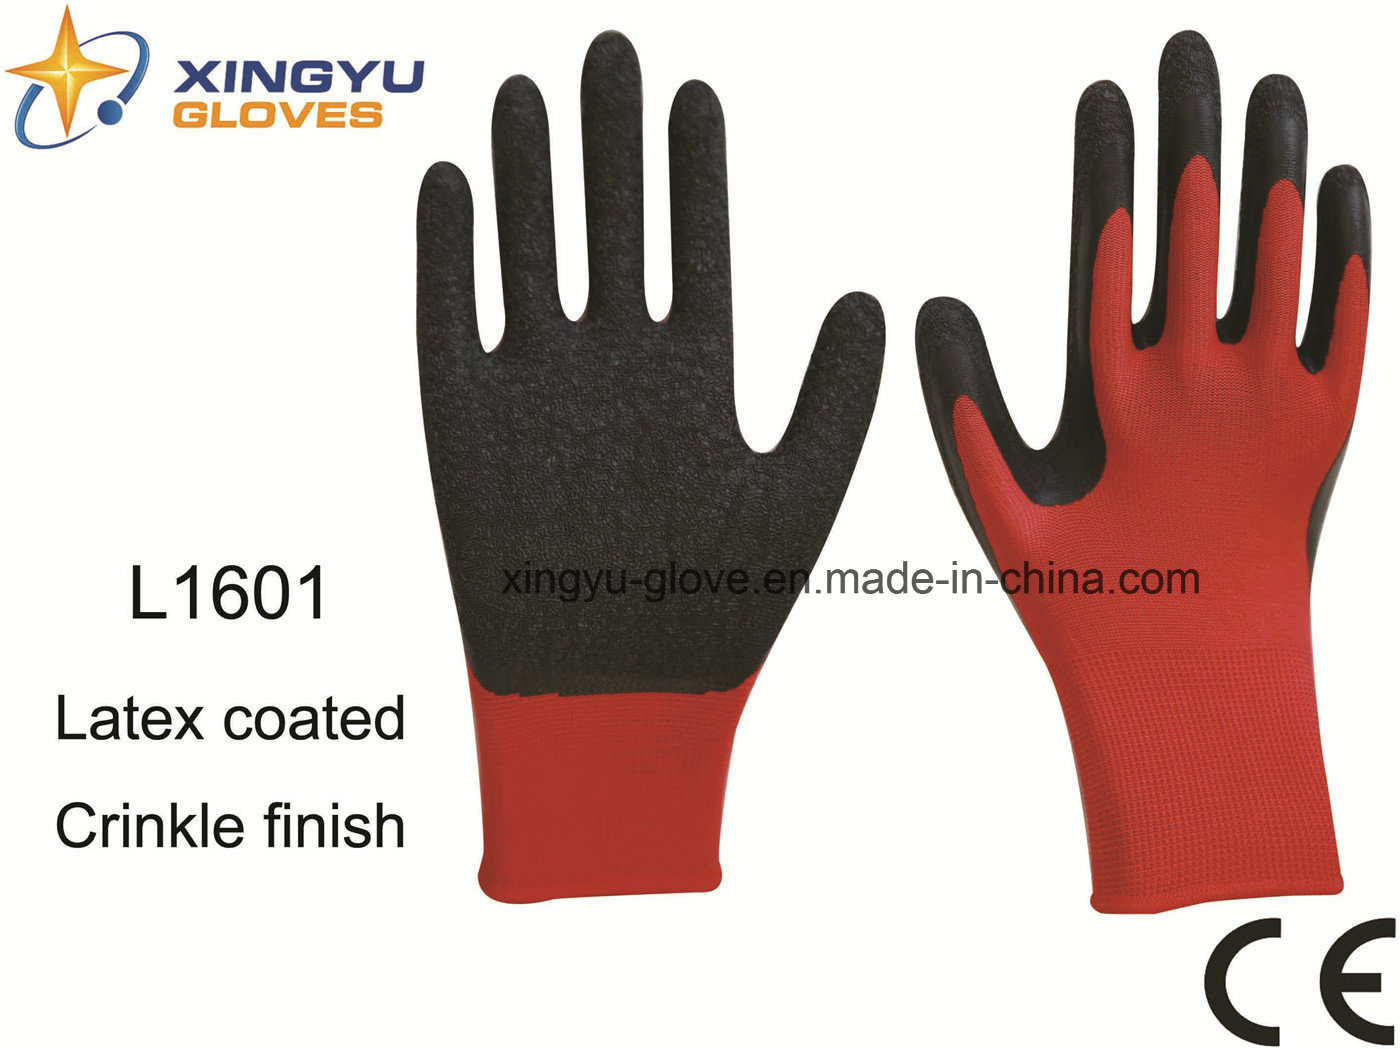 Polyester Shell Latex Coated Safety Work Glove (L1601)